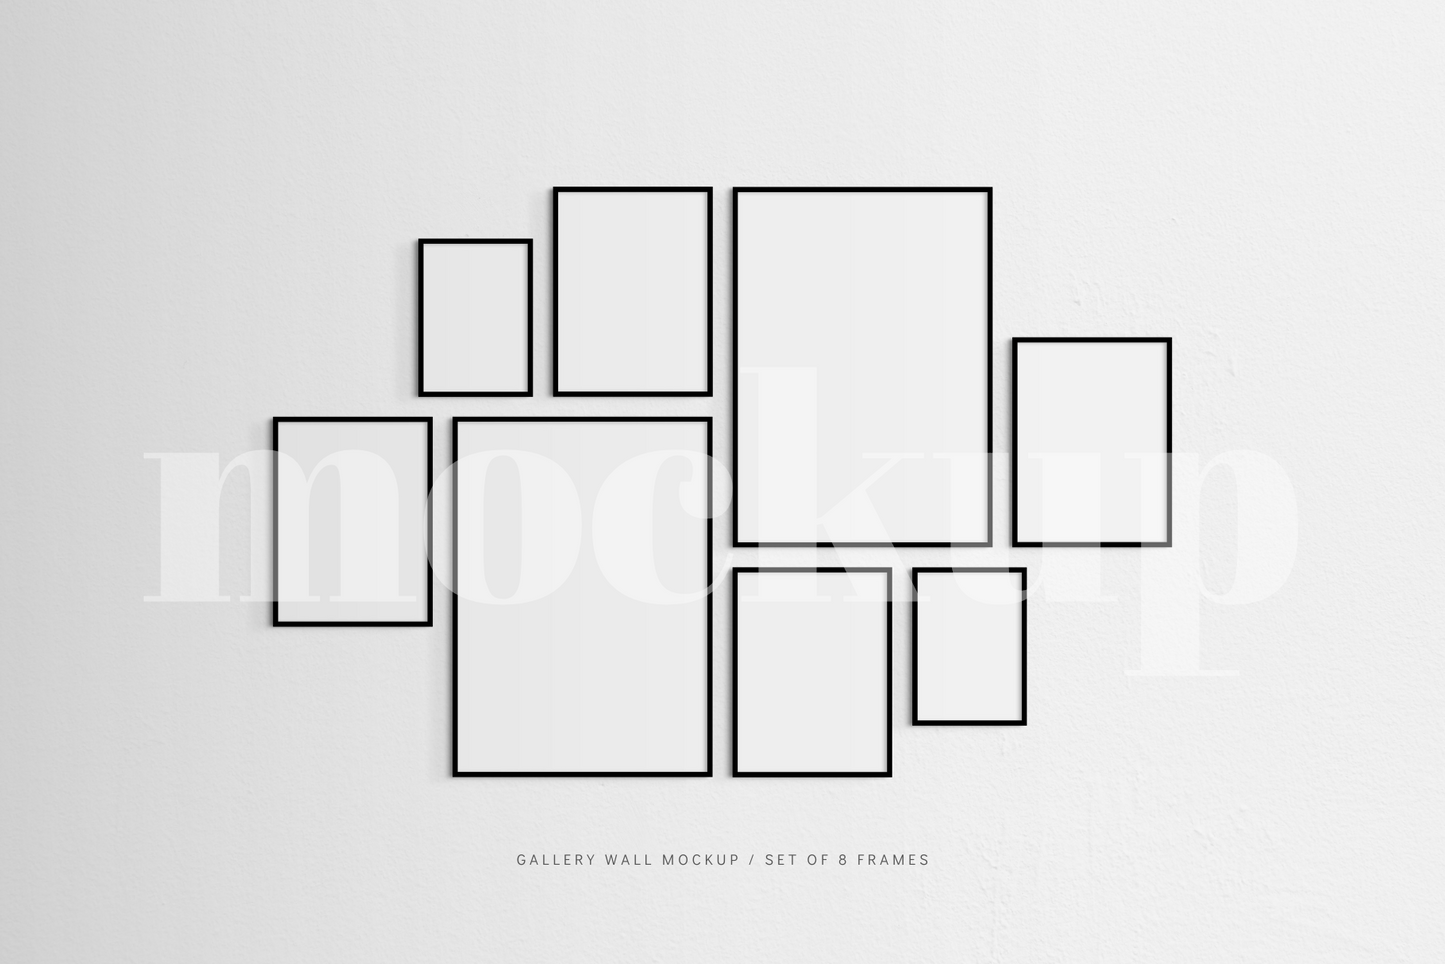 A modern, minimalist gallery wall mockup that features a set of 8 thin black frames.